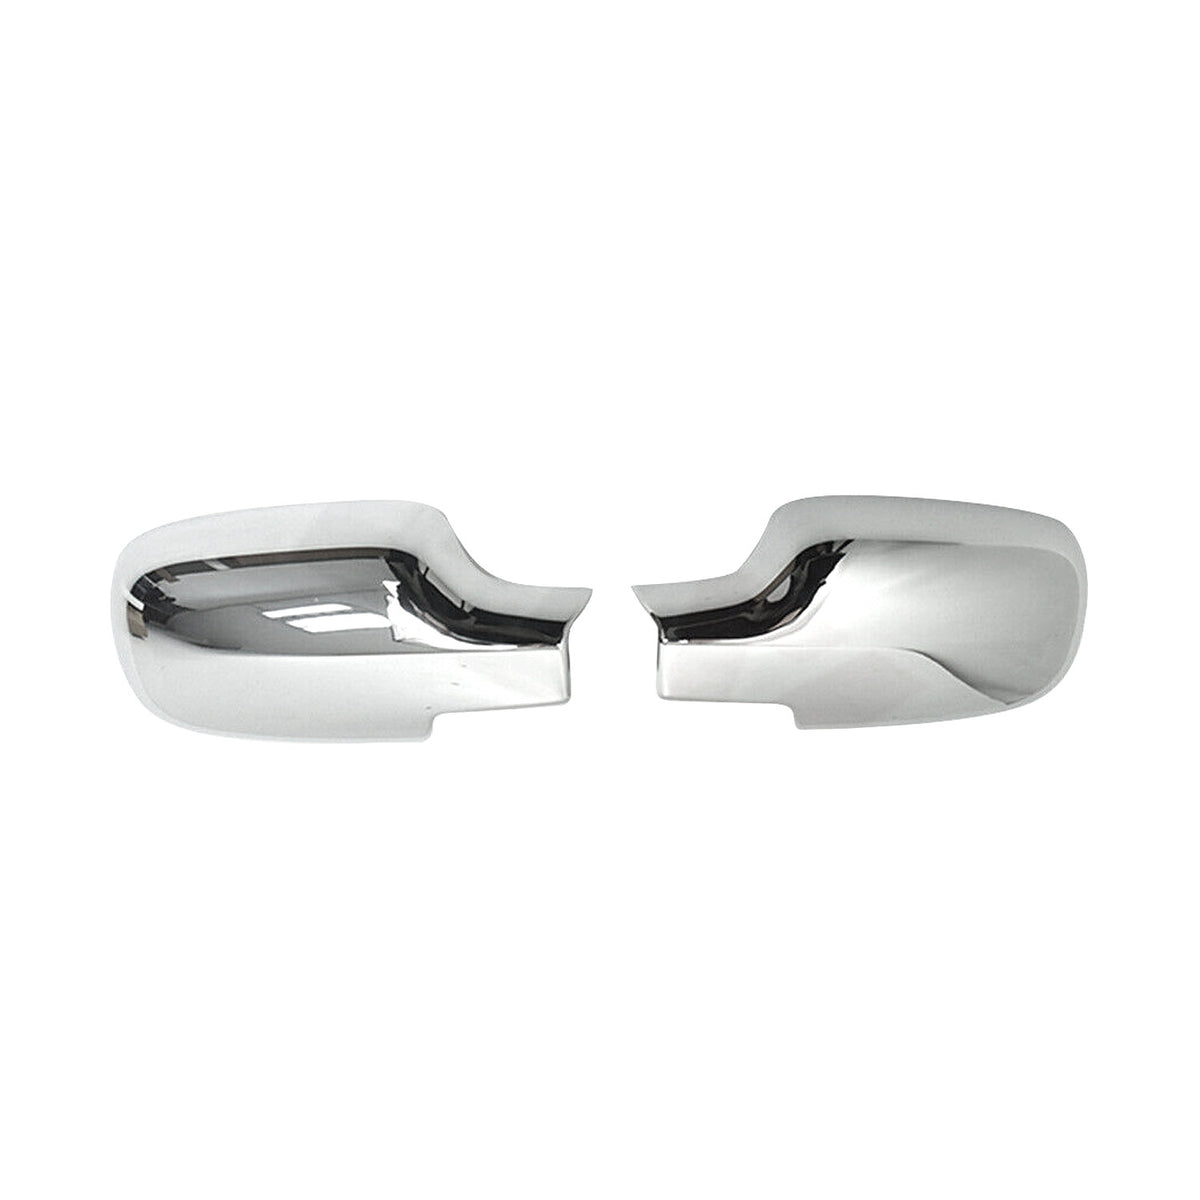 Mirror Caps Mirror Cover for Renault Megane 2002-2009 Chrome ABS Silver